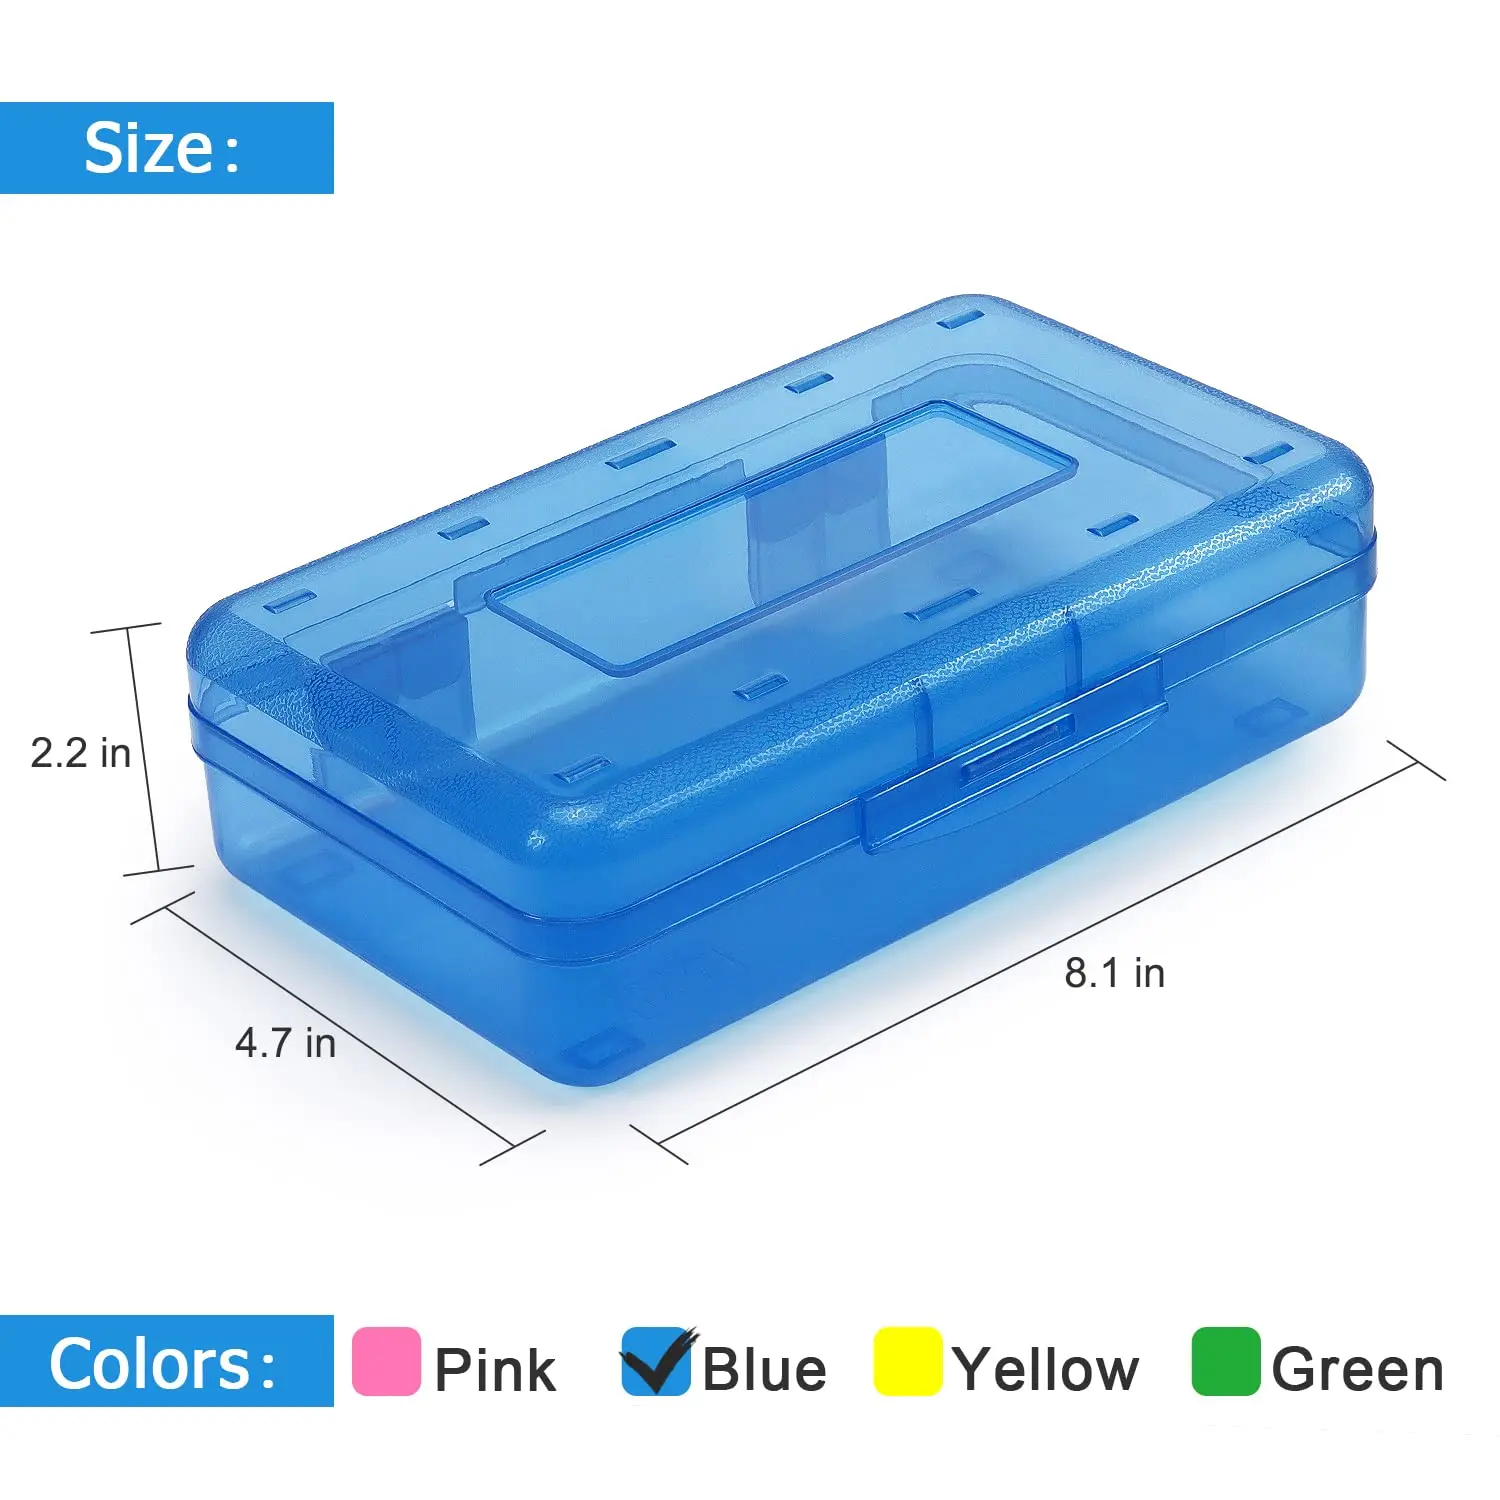 Plastic Pencil Box, Large Capacity Pencil Case for Kids Girls Boys Adults,  Hard Crayon Box Storage with Snap Lid for School - AliExpress